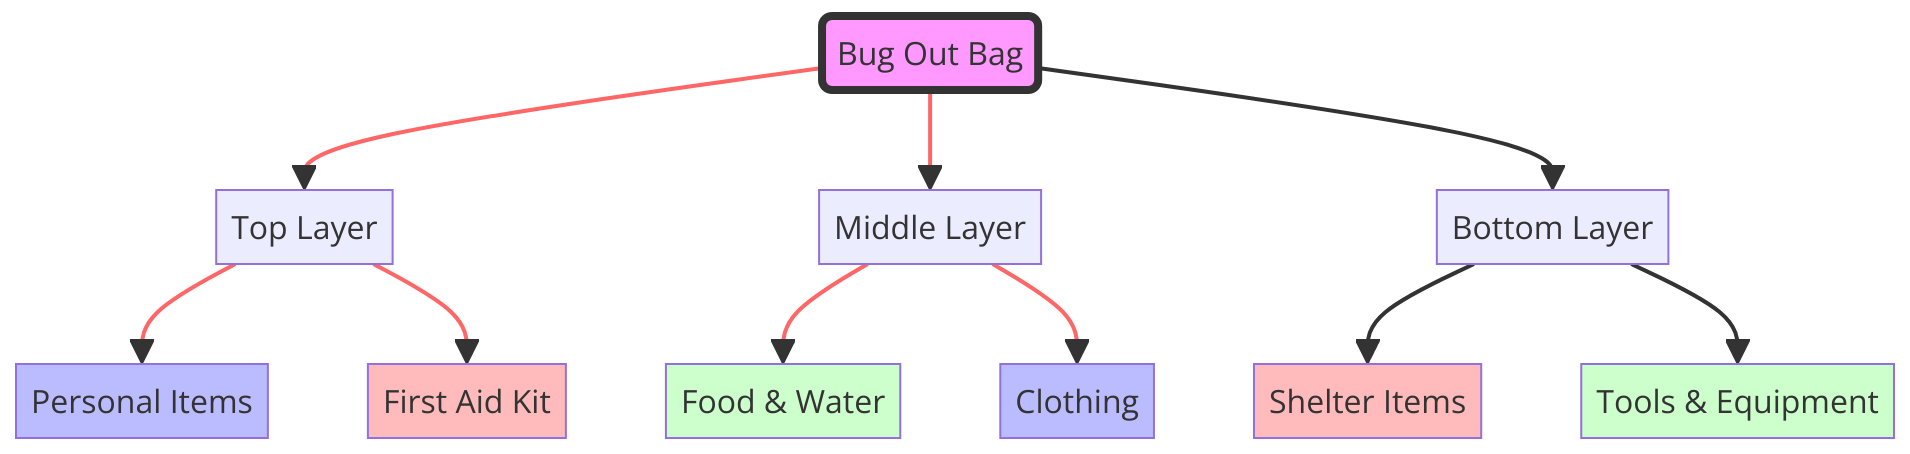 an optimal arrangement of items in an urban bug out bag to maximize space and ensure easy access to essential items